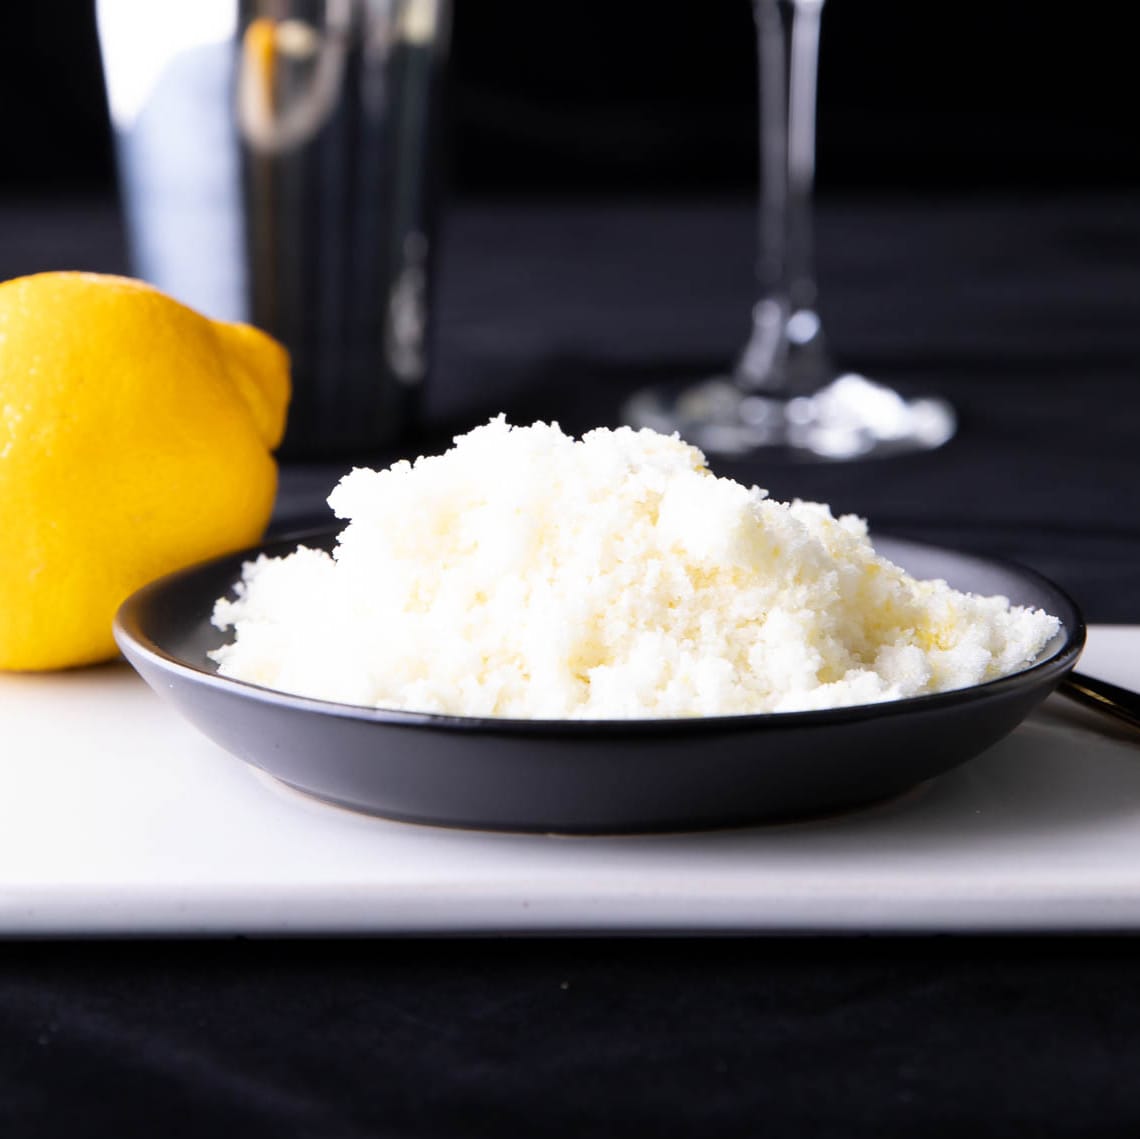 Plate full of lemon sugar served with a lemon and a cocktail set.